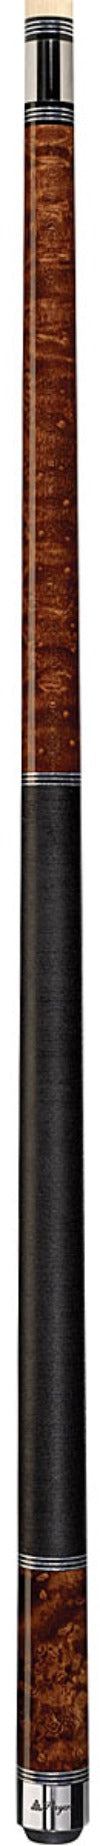 Players C-950 Pool Cue -Players